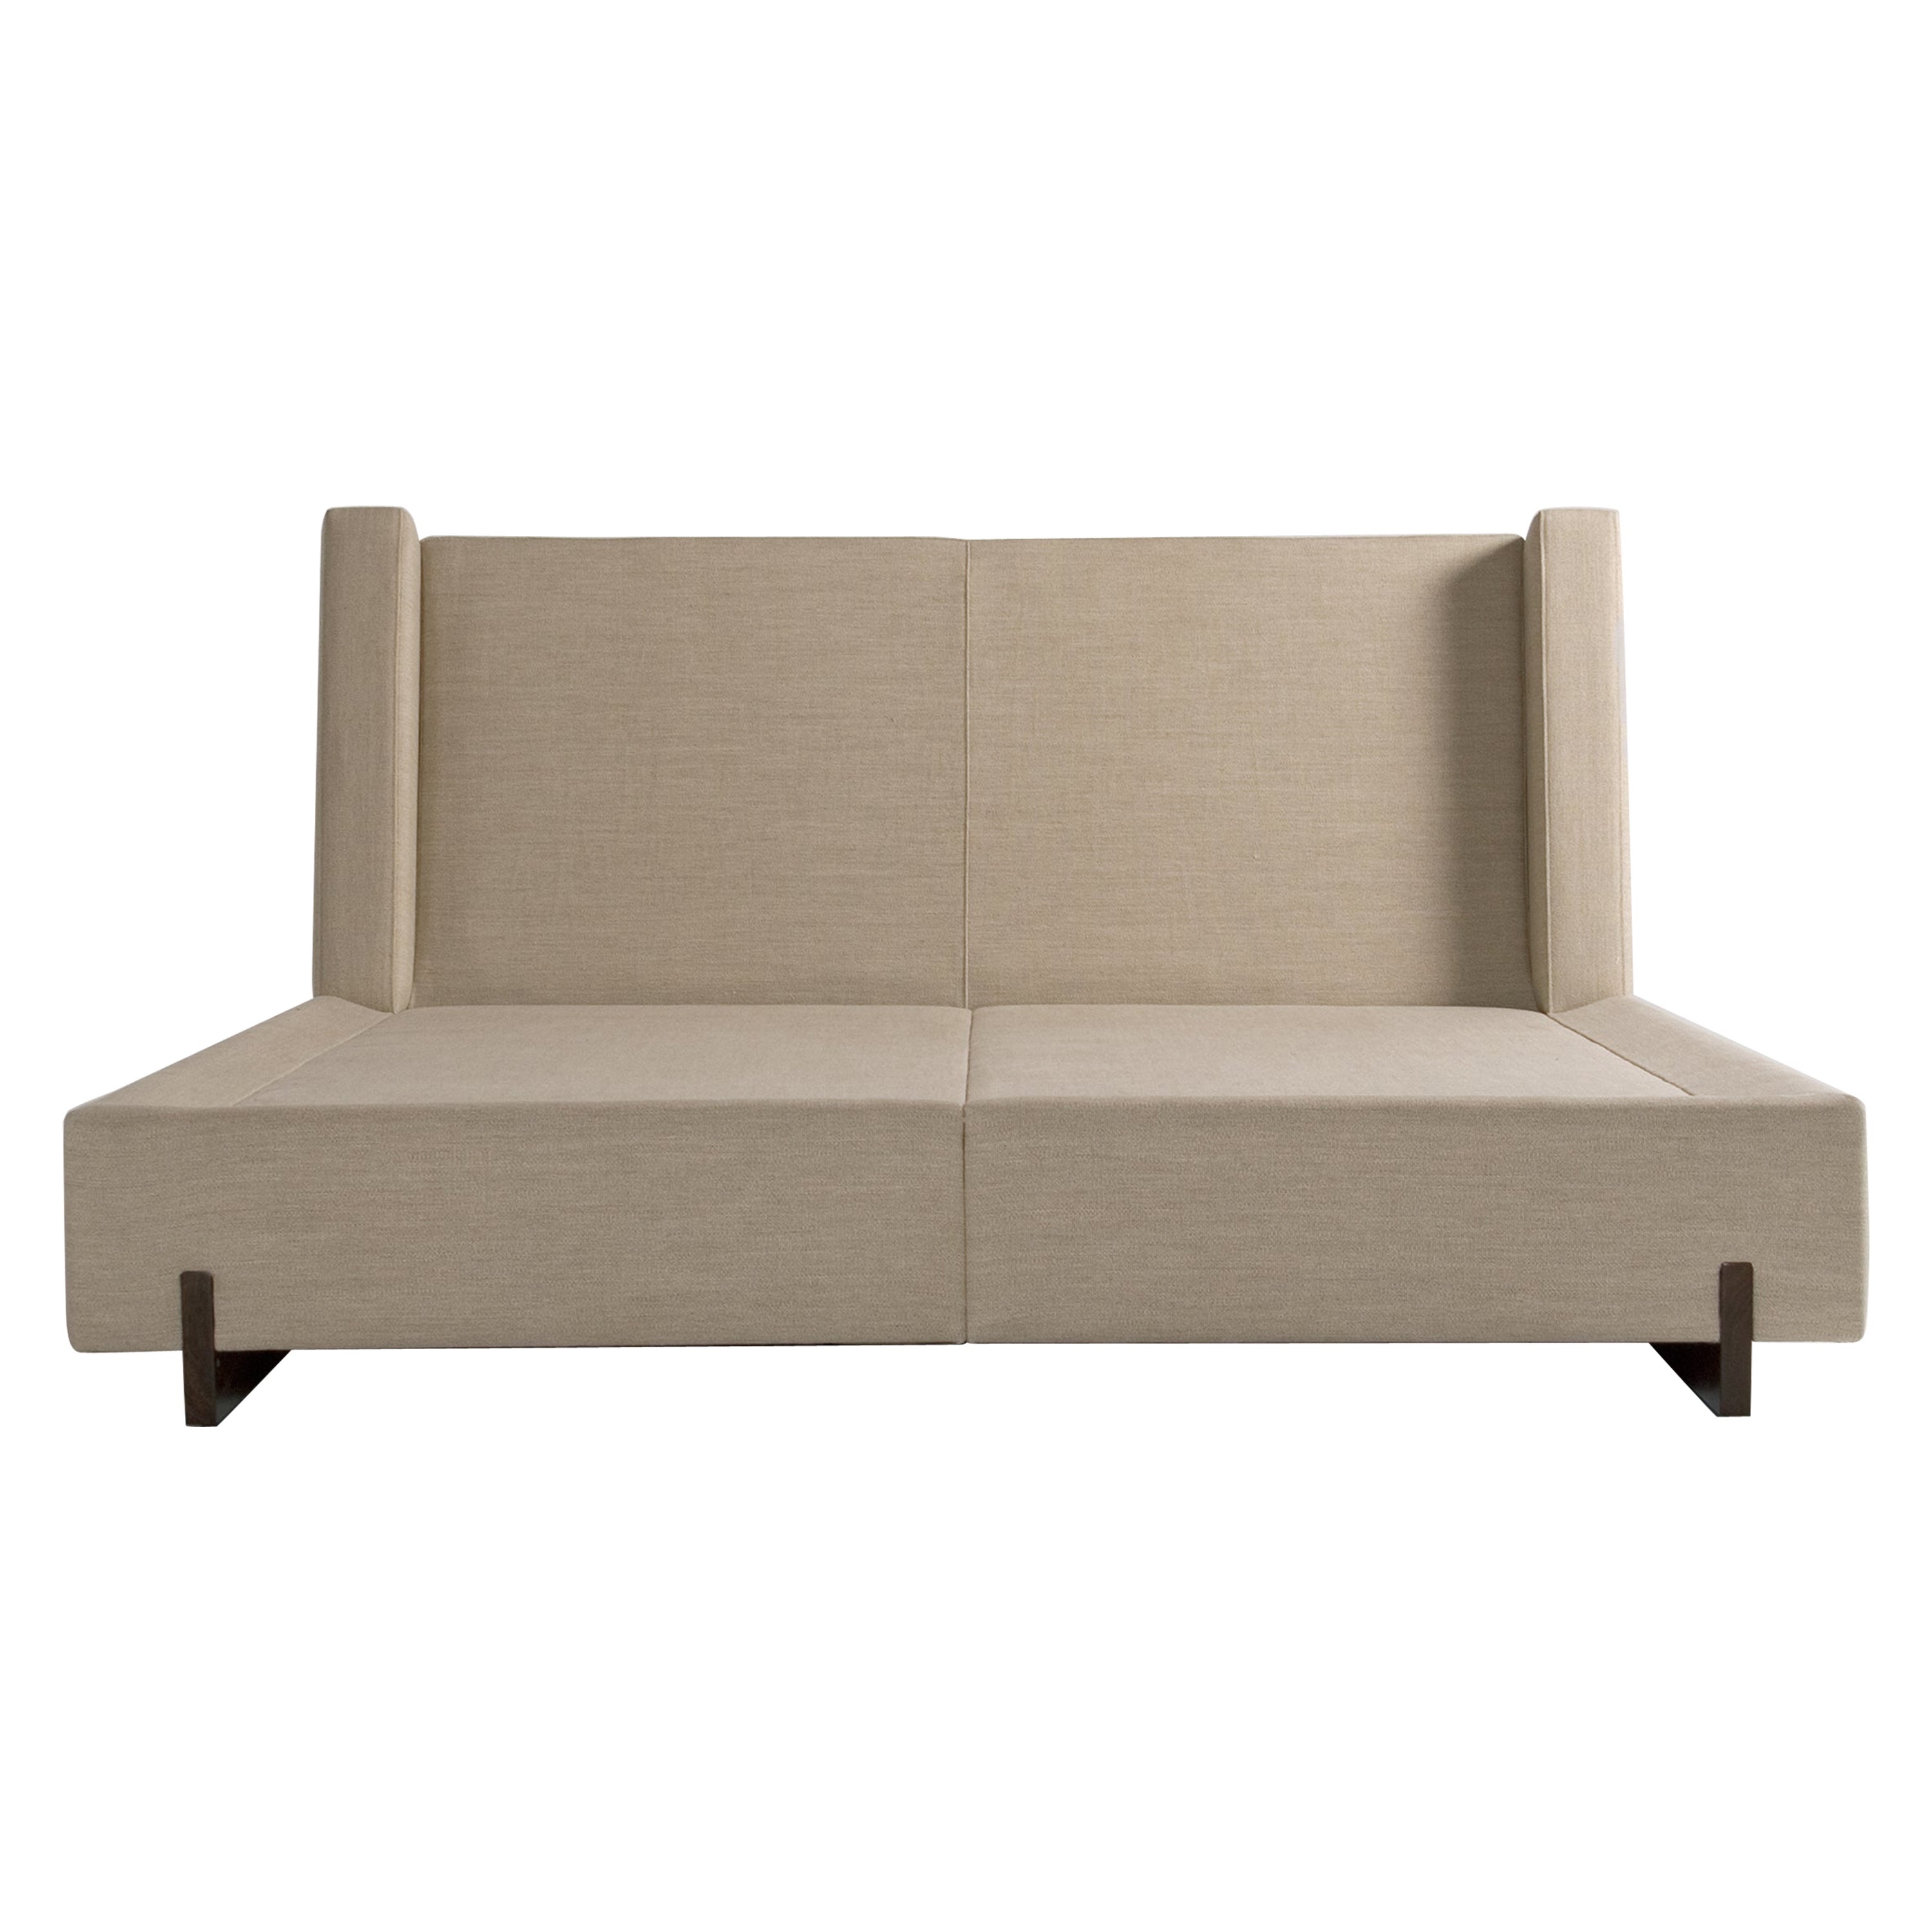 Trax King Bed by Phase Design For Sale